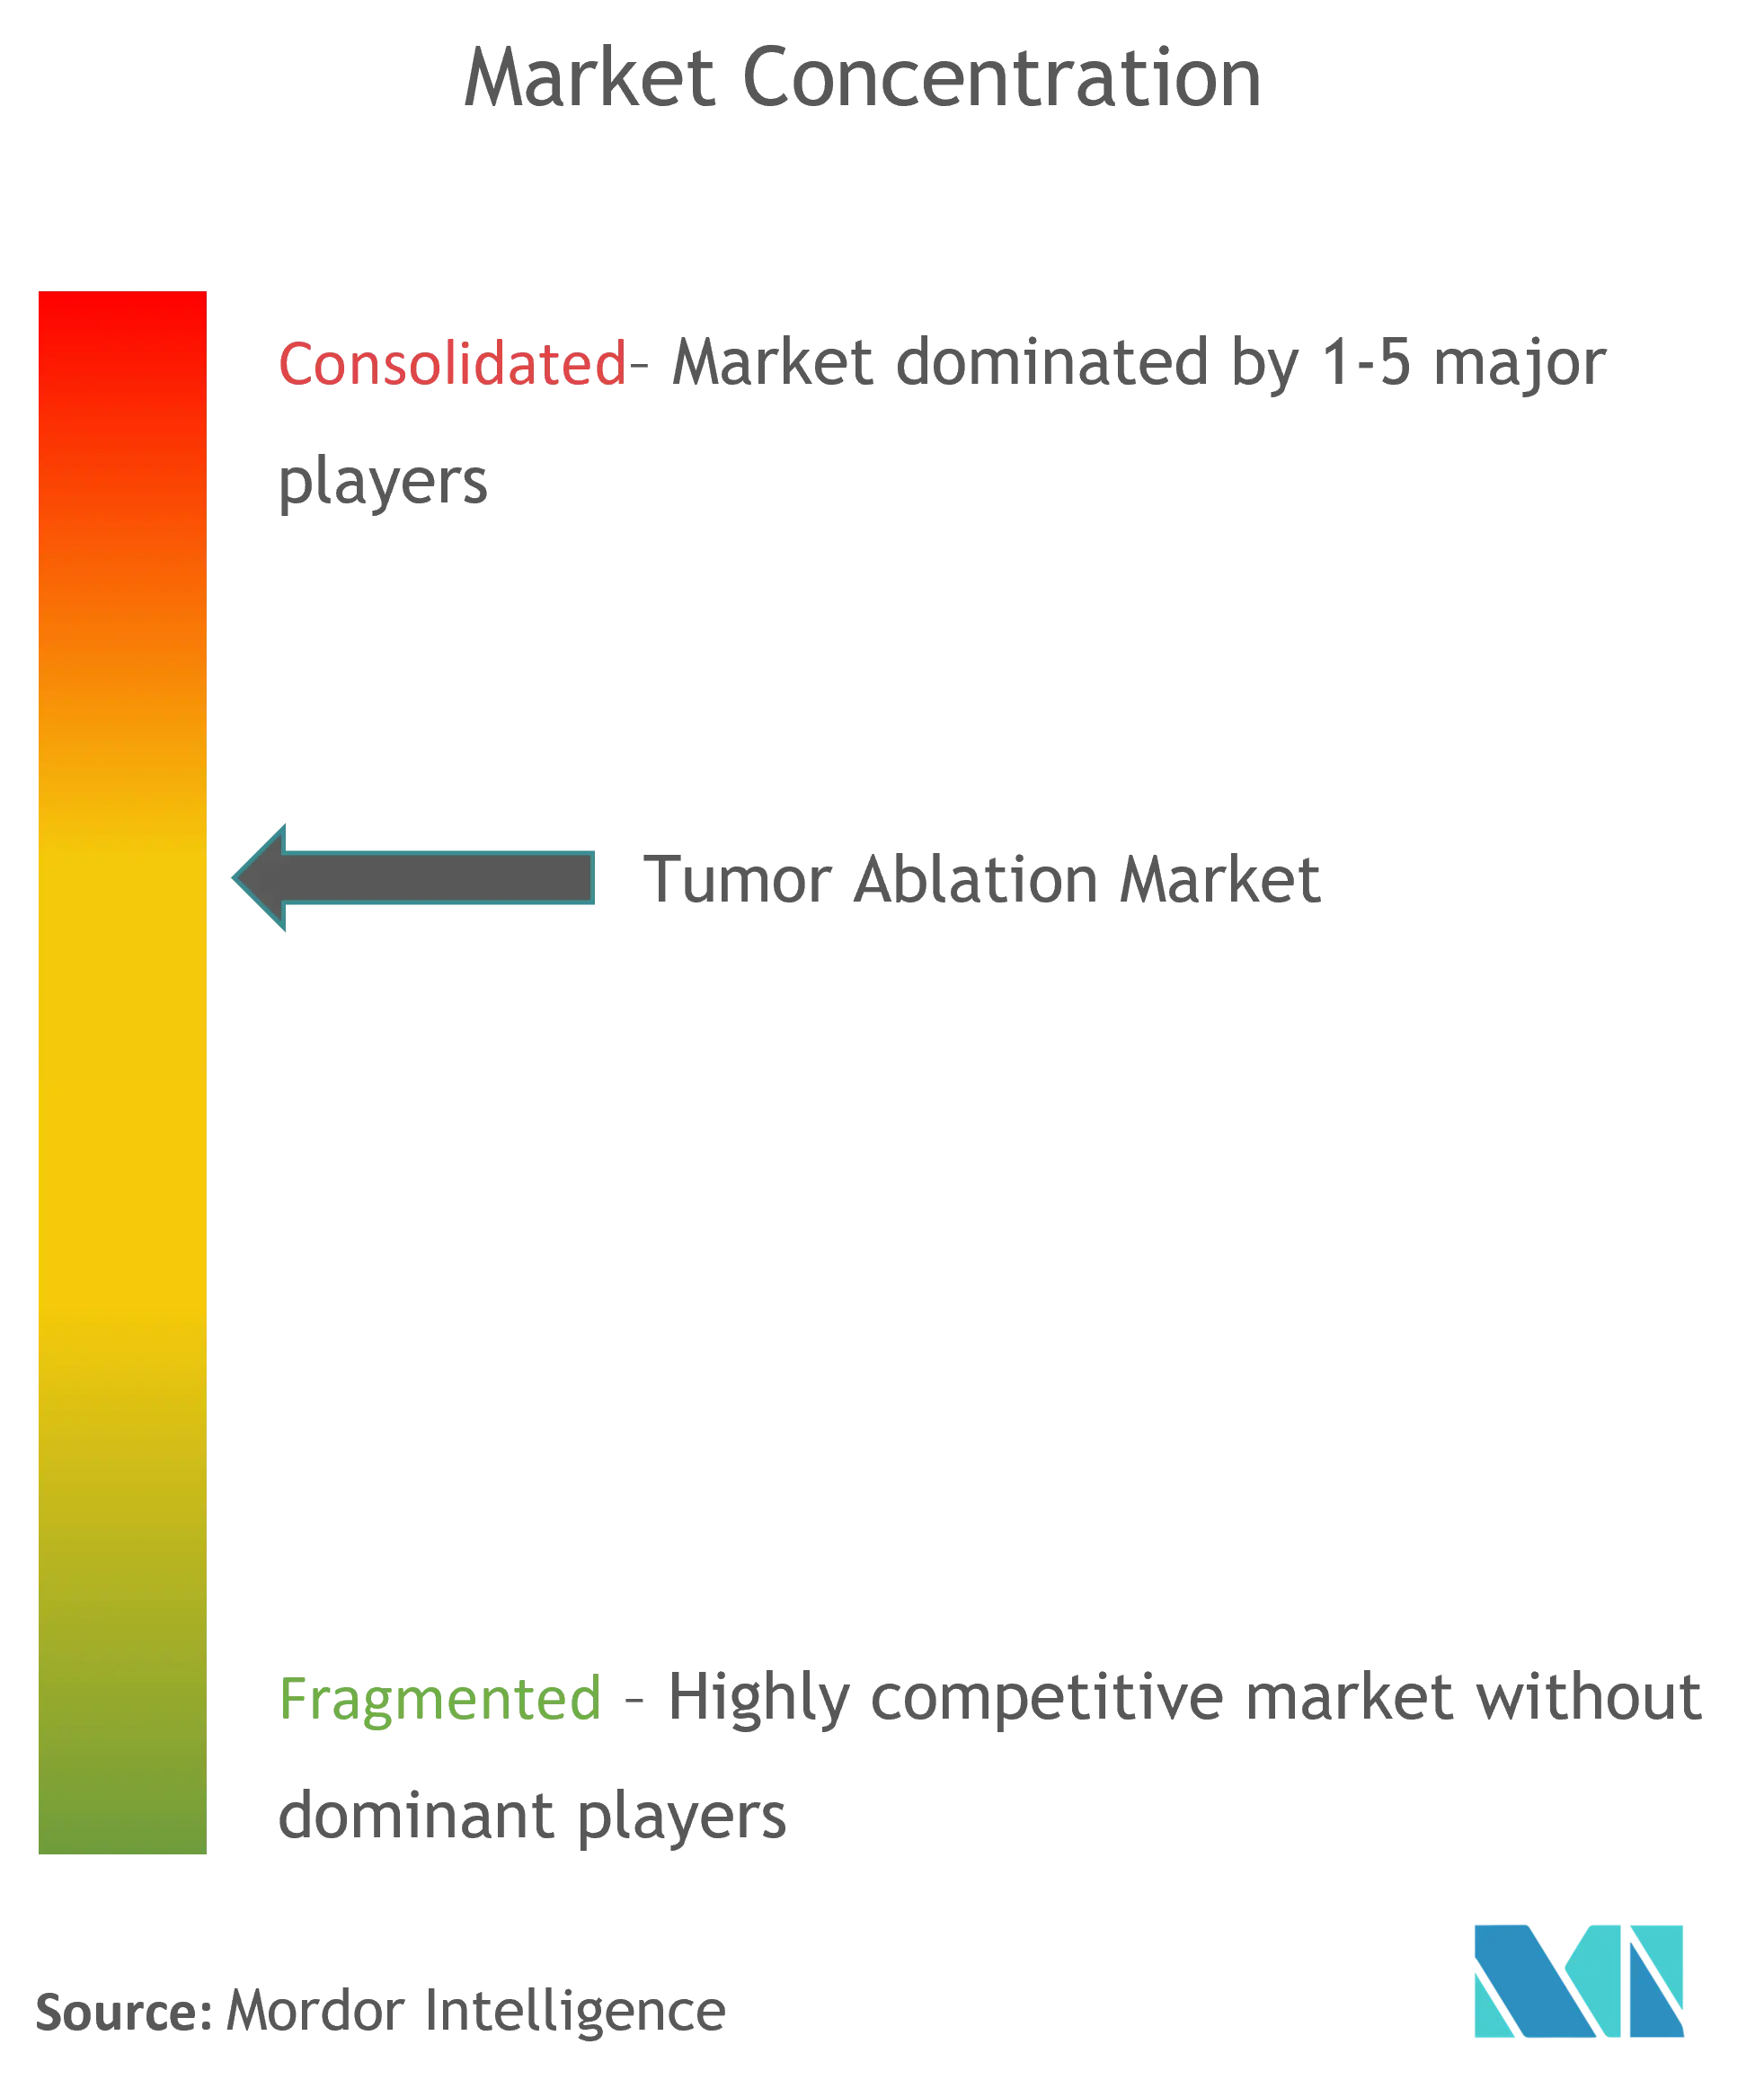 Tumor Ablation Market Concentration